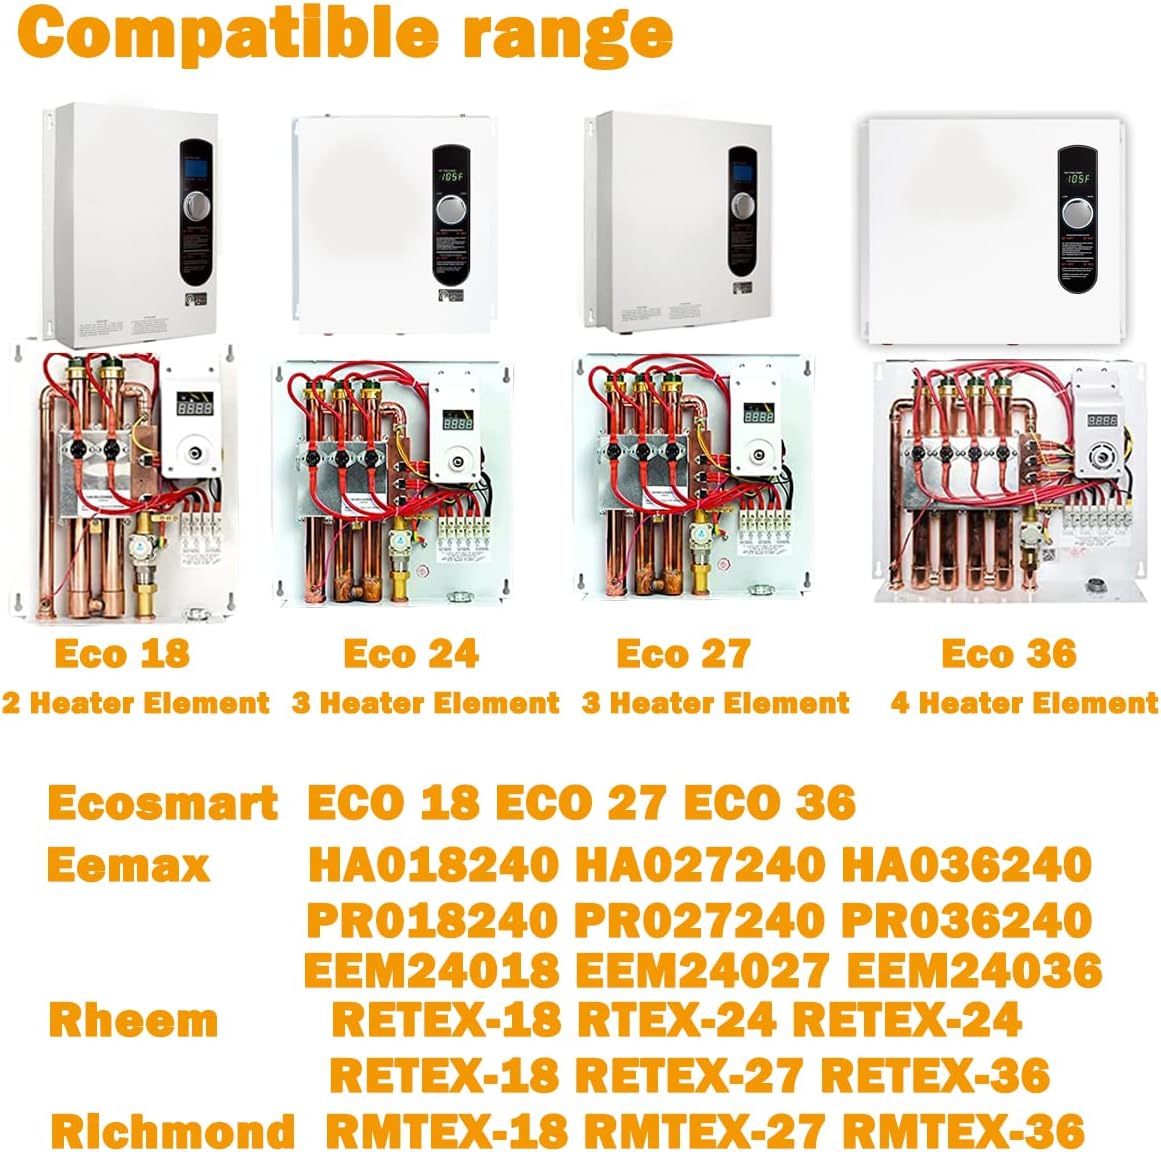 Nexjy HE 90240 Heating Element Compatible With ECO 18 24 27 36, 9000W/240V Water Heater Element for Eco'smart 18/24/27/36 Tankless Wa